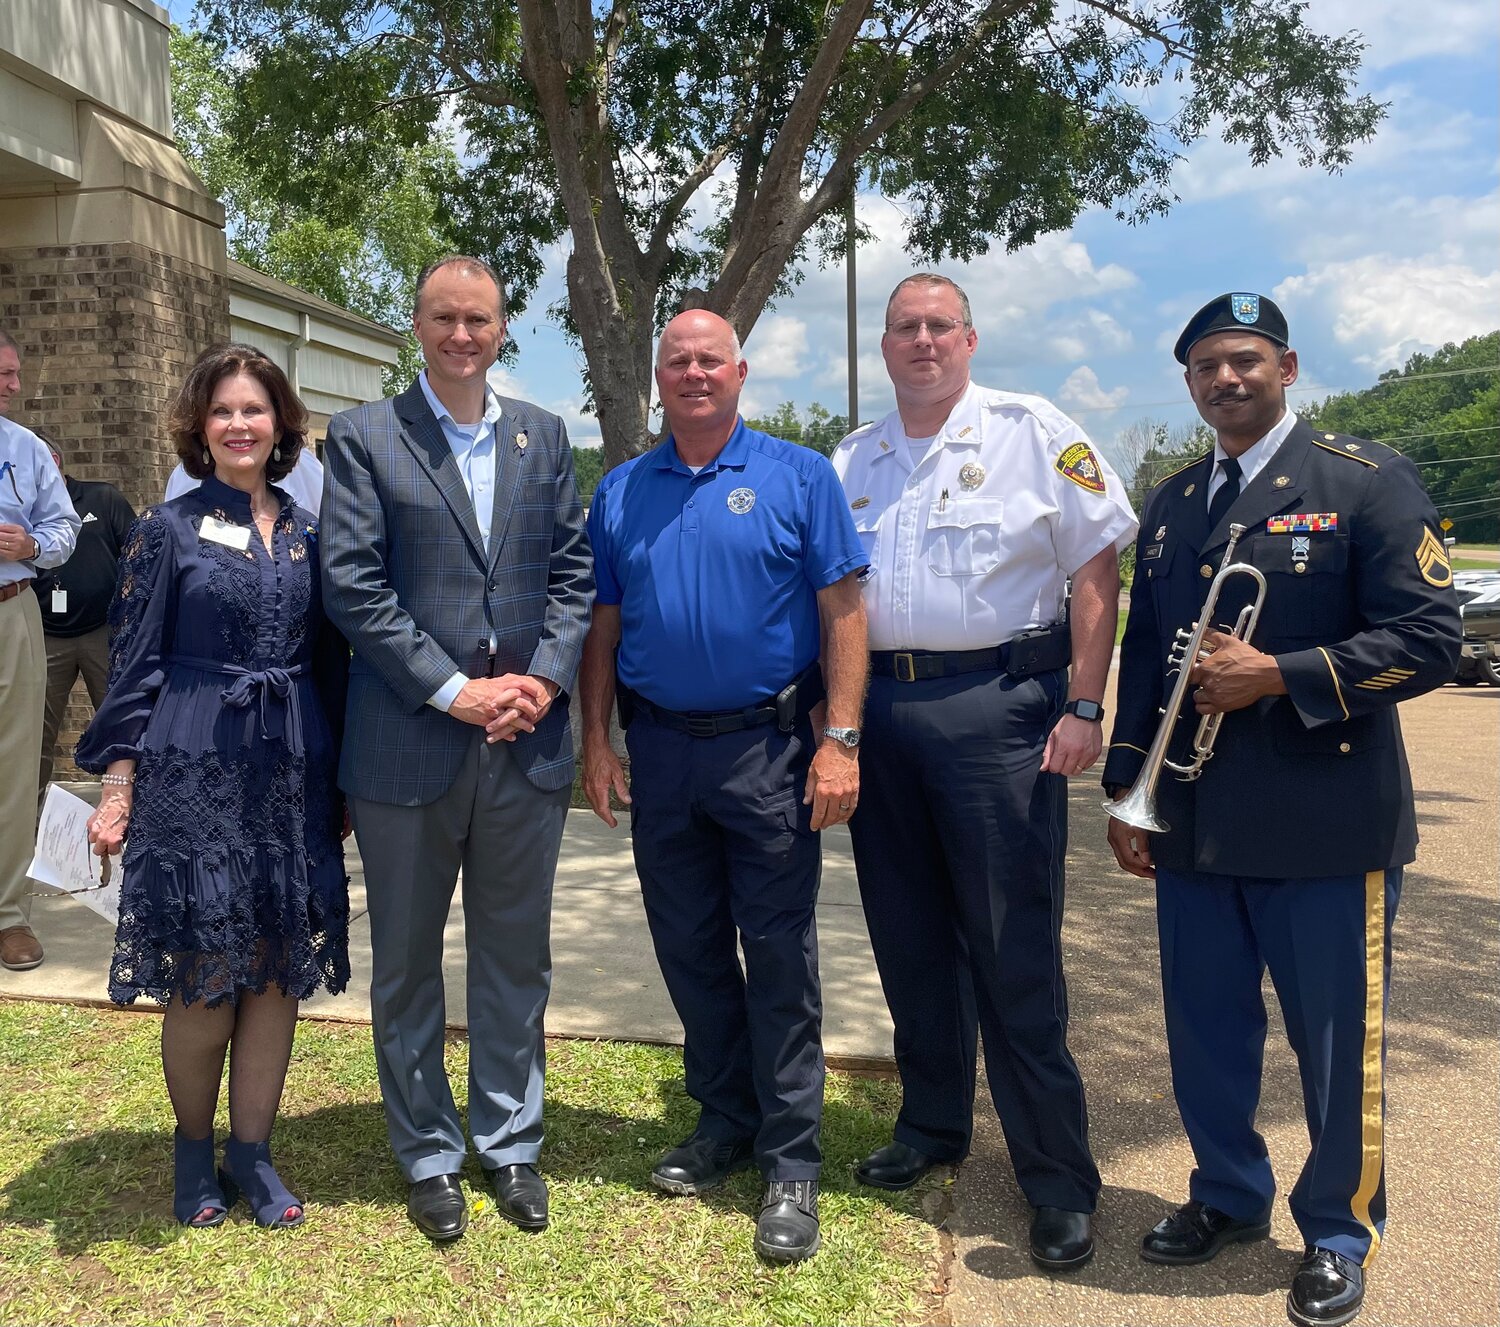 Pictured, from left, are Jan Collins, Executive Director at MCBL&F; Jason Dillon, Pastor at Parkway Church; Sheriff Randy Tucker; Chief Deputy Sheriff Jeremy Williams; and Staff Sergeant Joseph Handy.